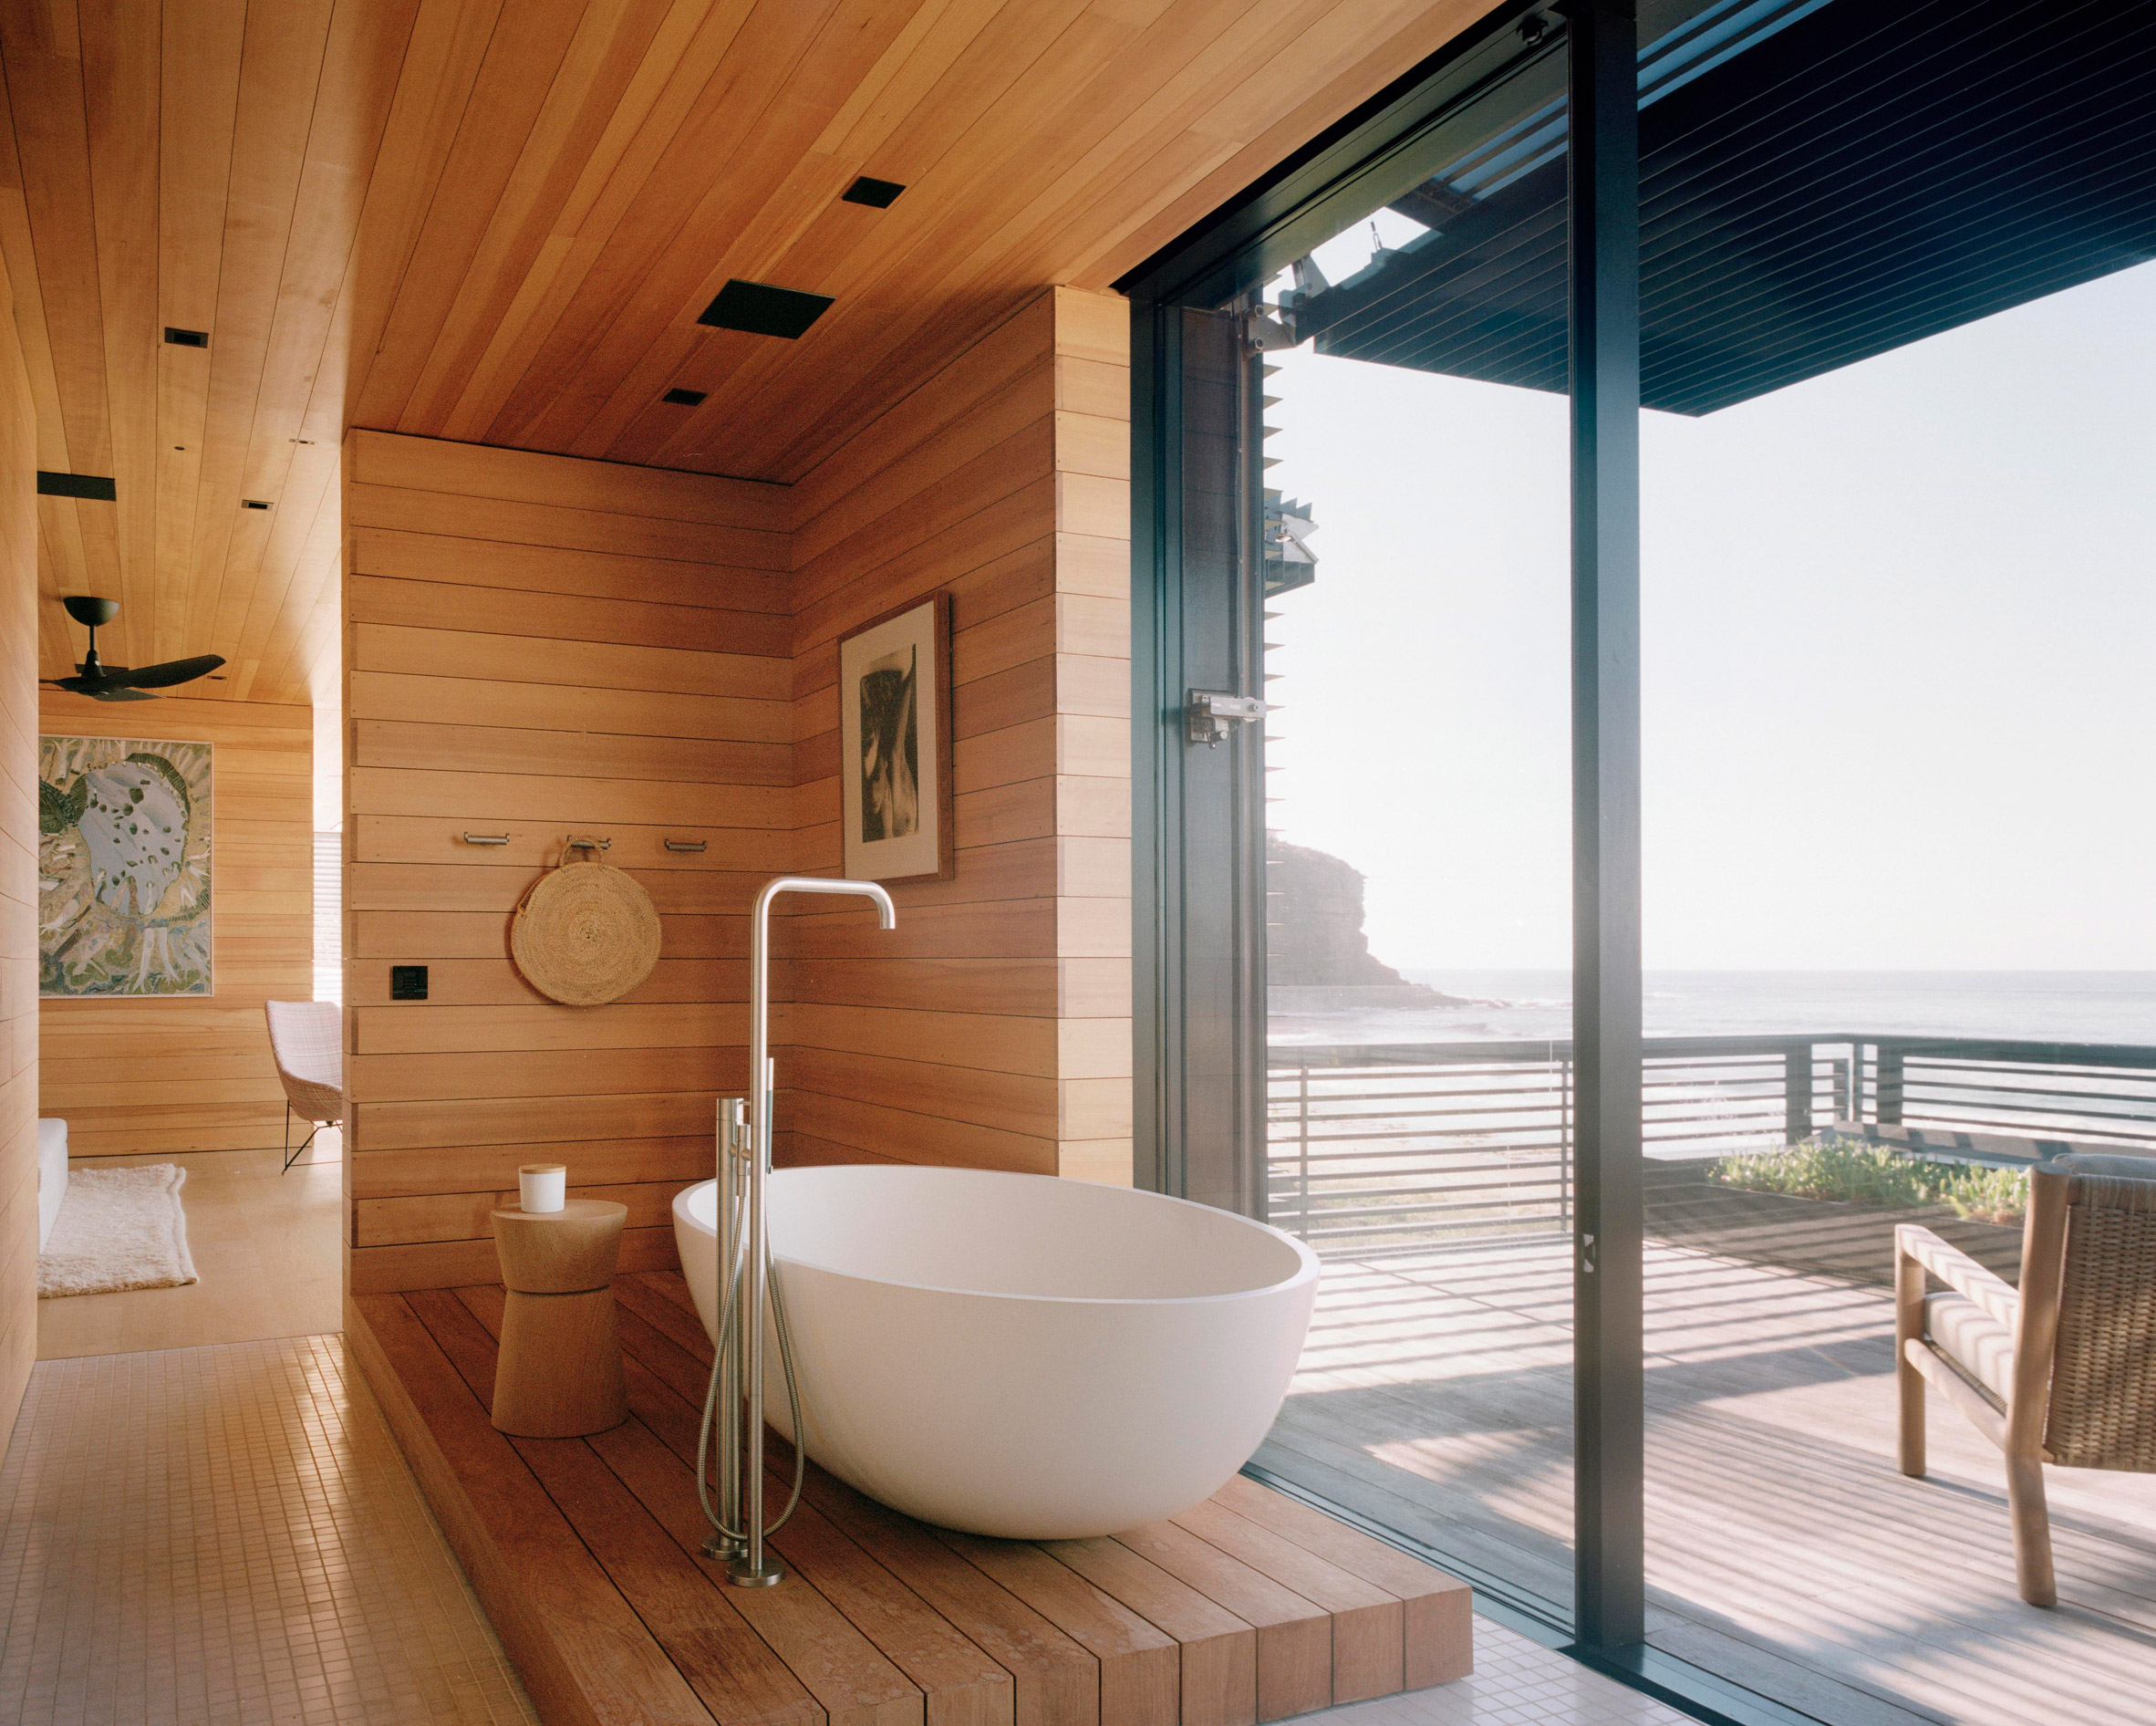 A free standing bath is pictured in a wood-lined bathroom